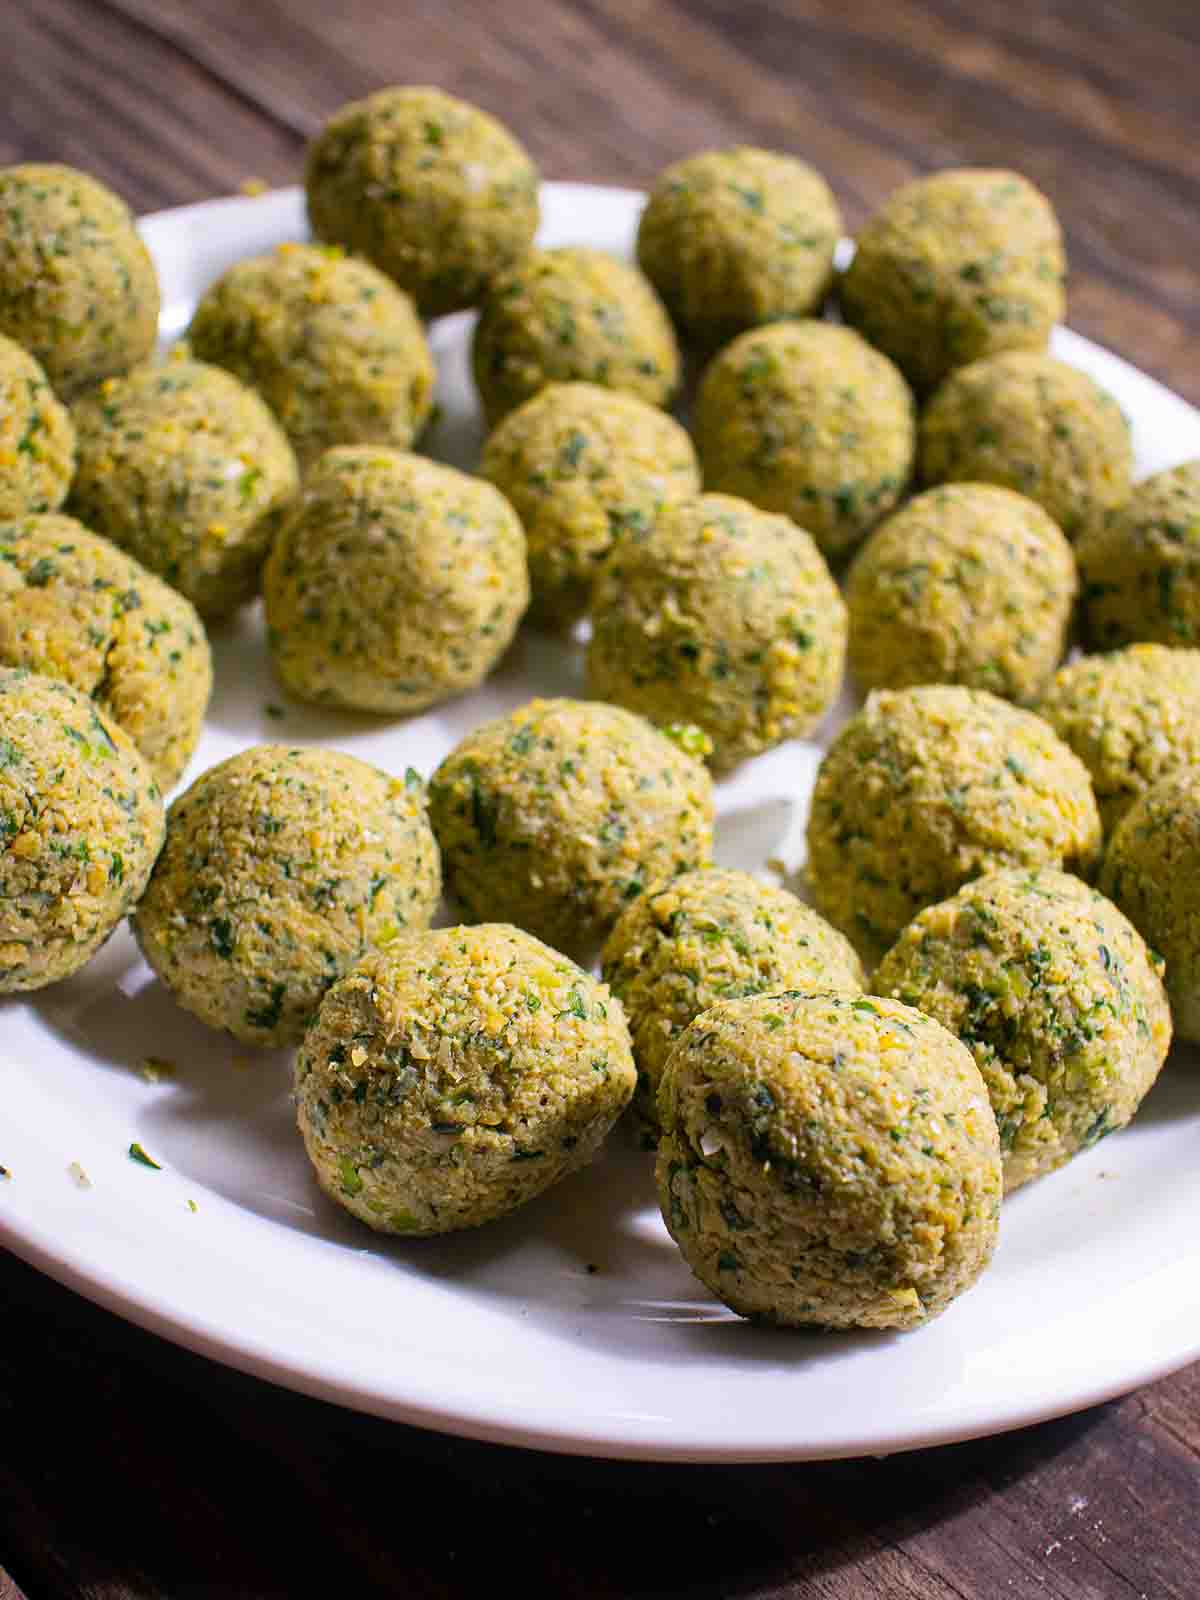 bals of falafel on a white plate